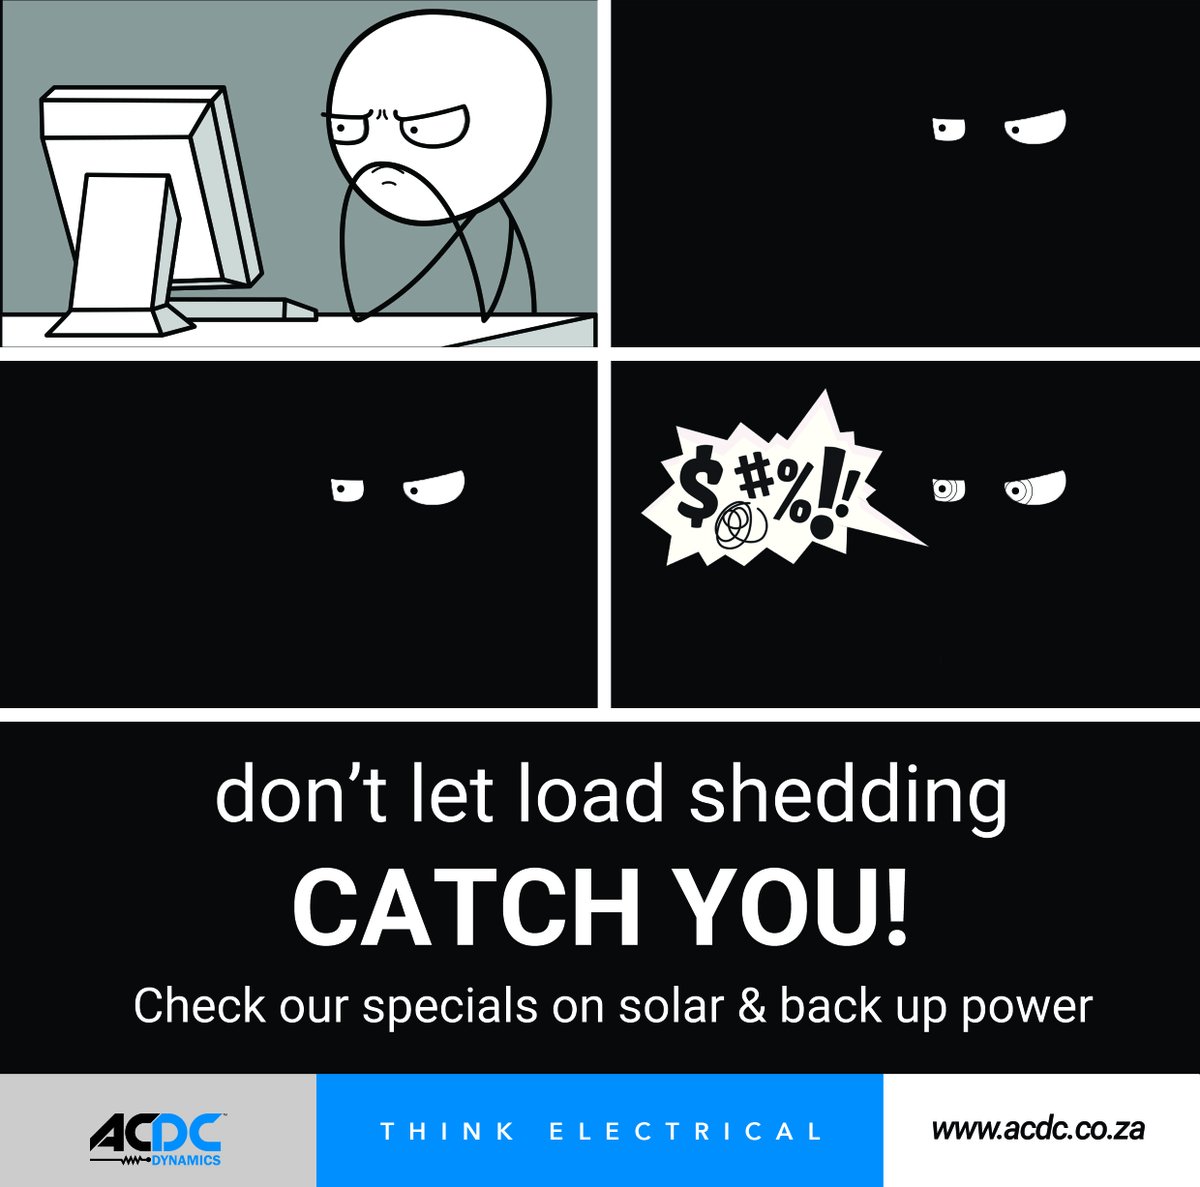 Just when you thought things are going back to normal...Eskom implements Stage 2 load shedding with immediate effect. Don't find yourself in a rut, ACDC Dynamics has your back! Click here: bit.ly/360JETO #loadshedding #lightsout #eskom #stage2